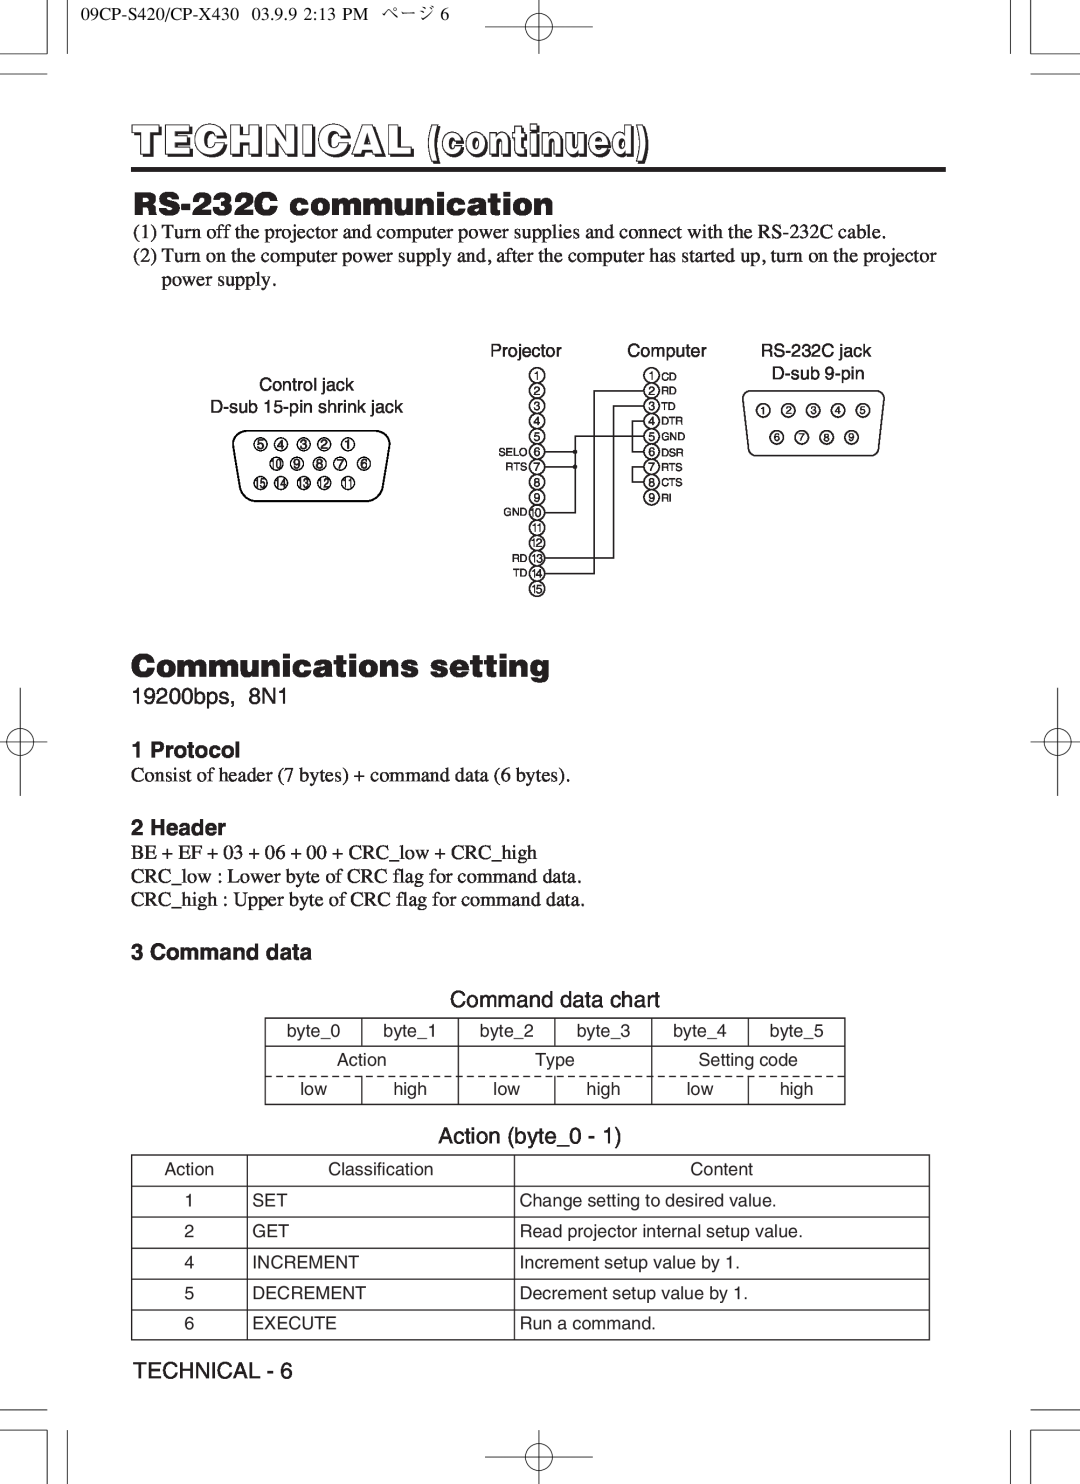 Hitachi CP-X430W RS-232Ccommunication, Communications setting, Protocol, Header, Command data, TECHNICAL continued 